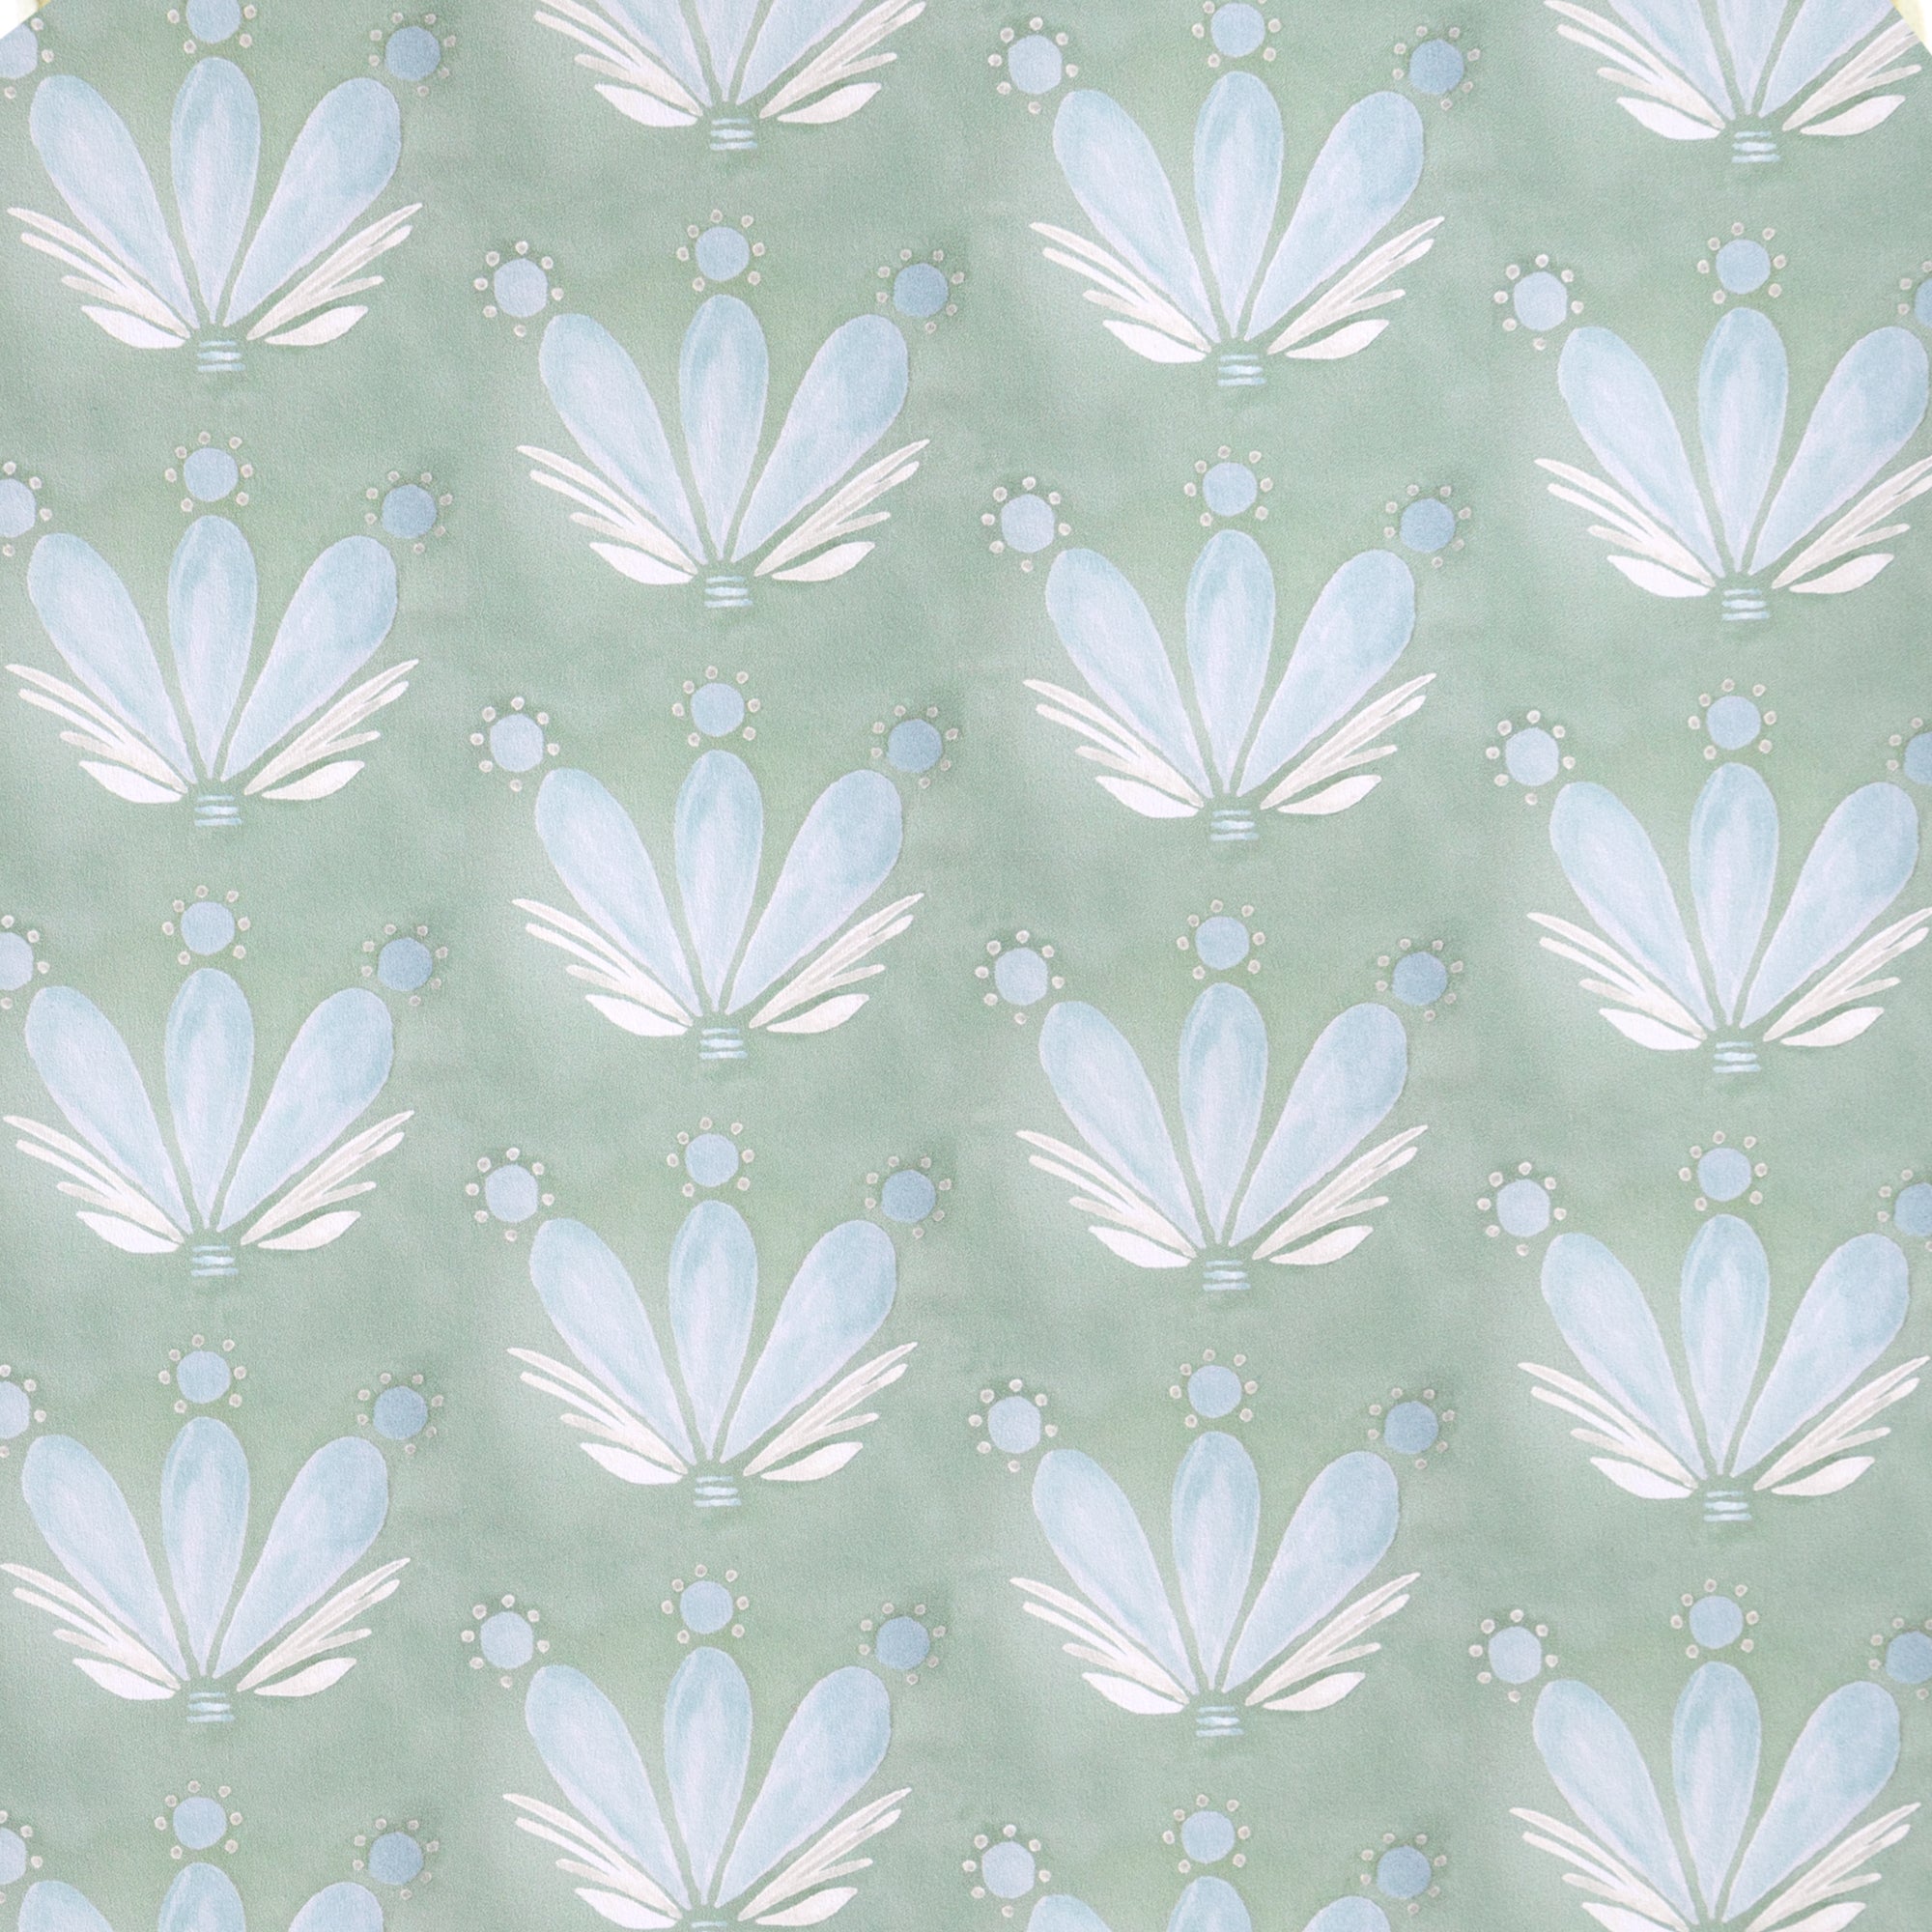 Blue & Green Floral Drop Repeat Printed Wallpaper Swatch